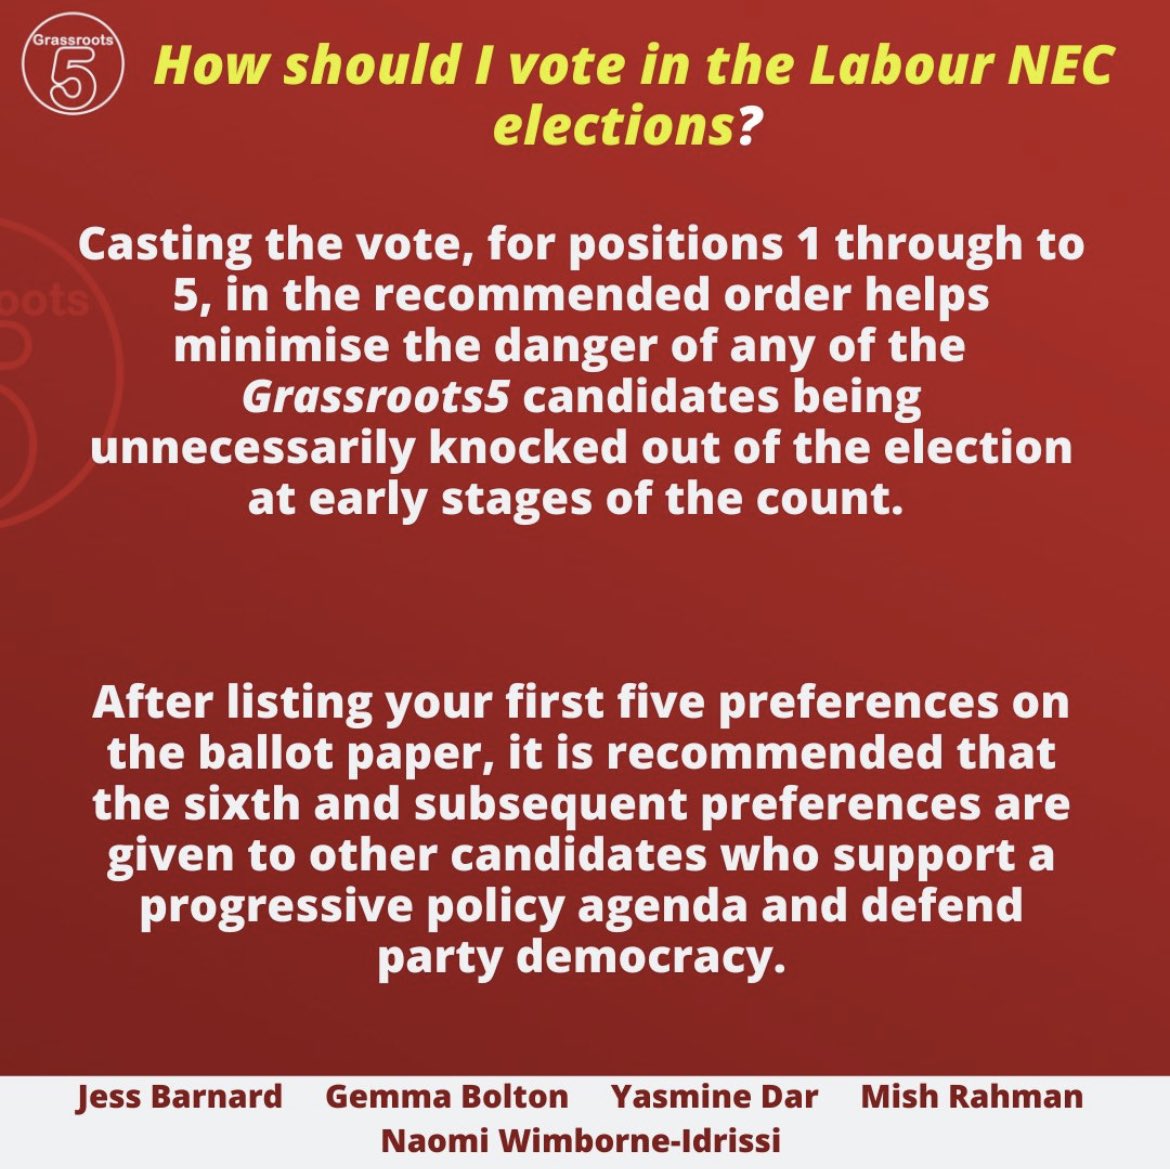 STV voting system? Clear double standards, as @CLPD_Labour opposes PR for General Elections. Prominent backers lay bare their stance on #ProportionalRepresentation . #makevotesmatter #LabourNEC #Grassroots5